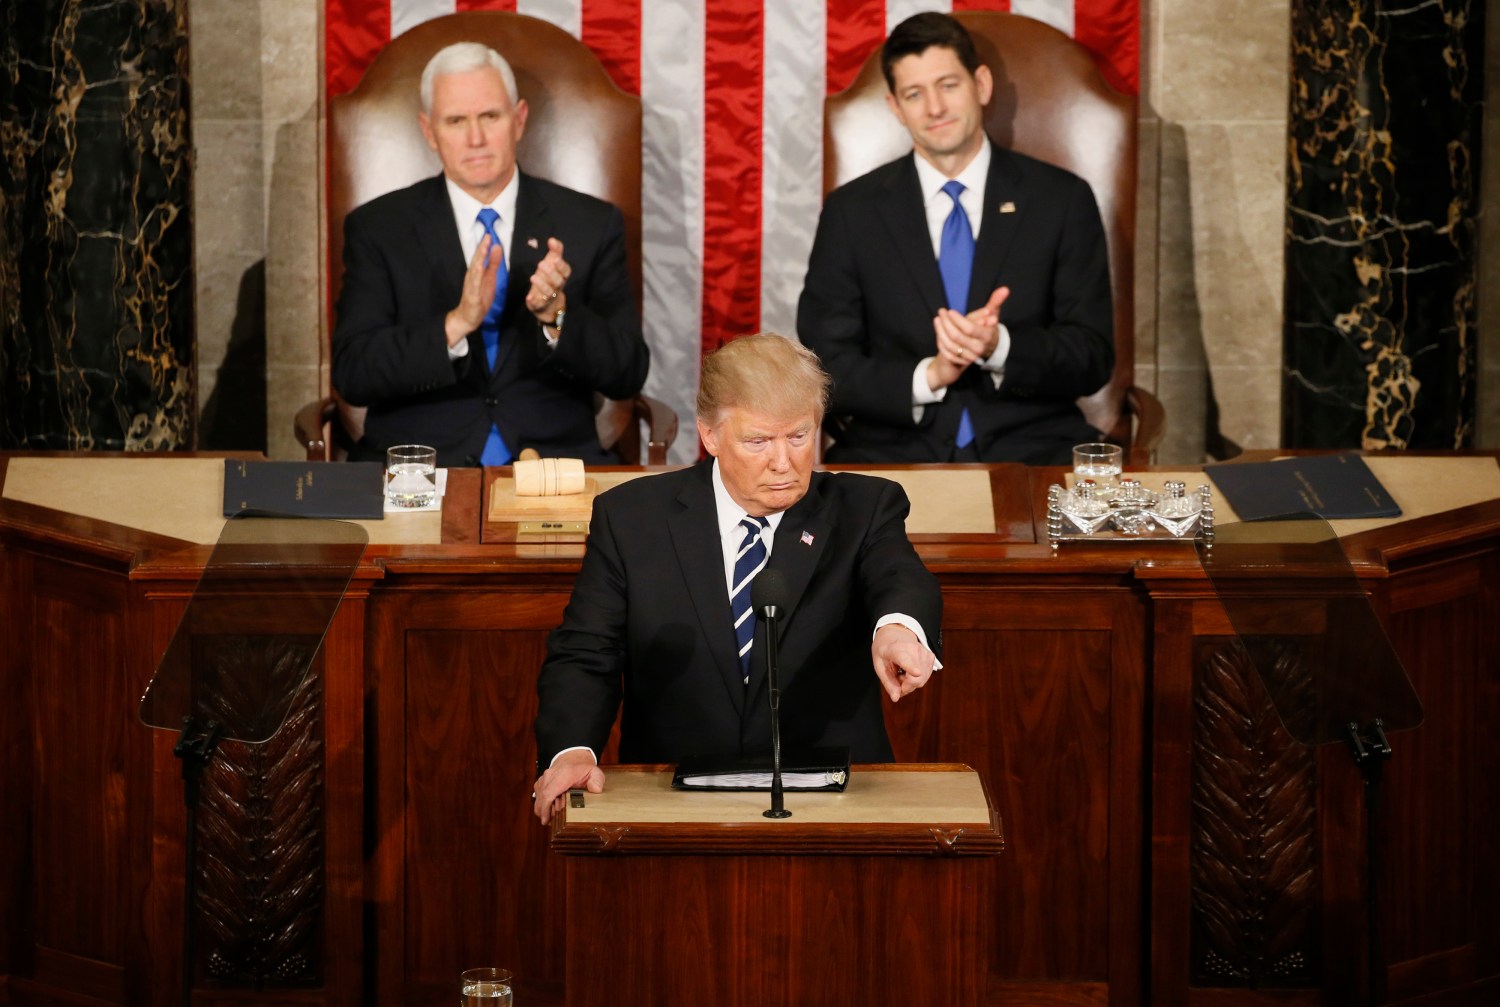 U.S. President Trump addresses Joint Session of Congress